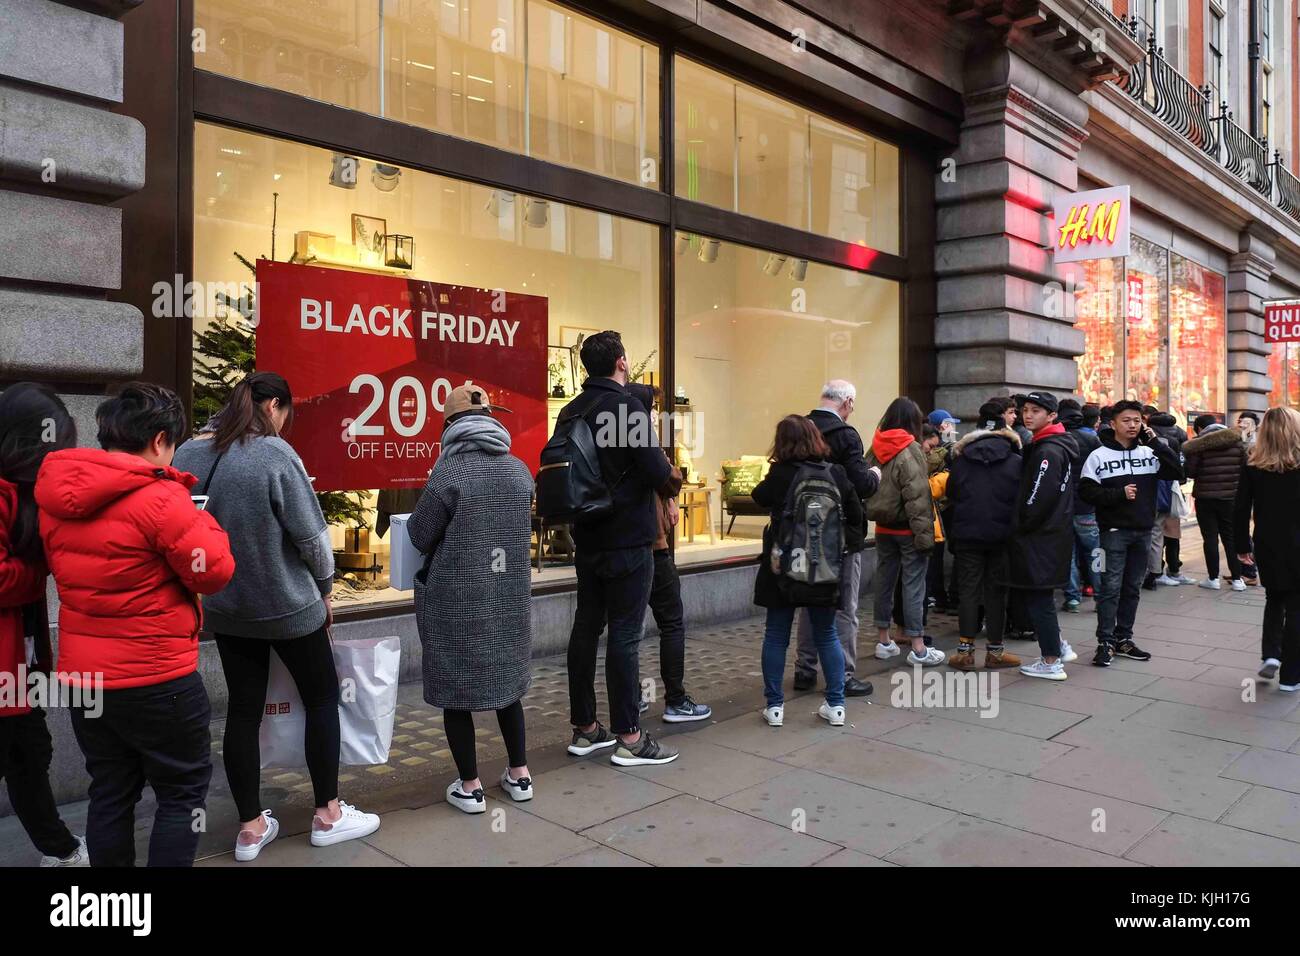 London, UK. 24th Nov, 2017. Eager black friday shoppers queue outside Uniqlo  and H&M on Oxford Street before the stores opens at 8am. : Credit: claire  doherty/Alamy Live News Stock Photo - Alamy